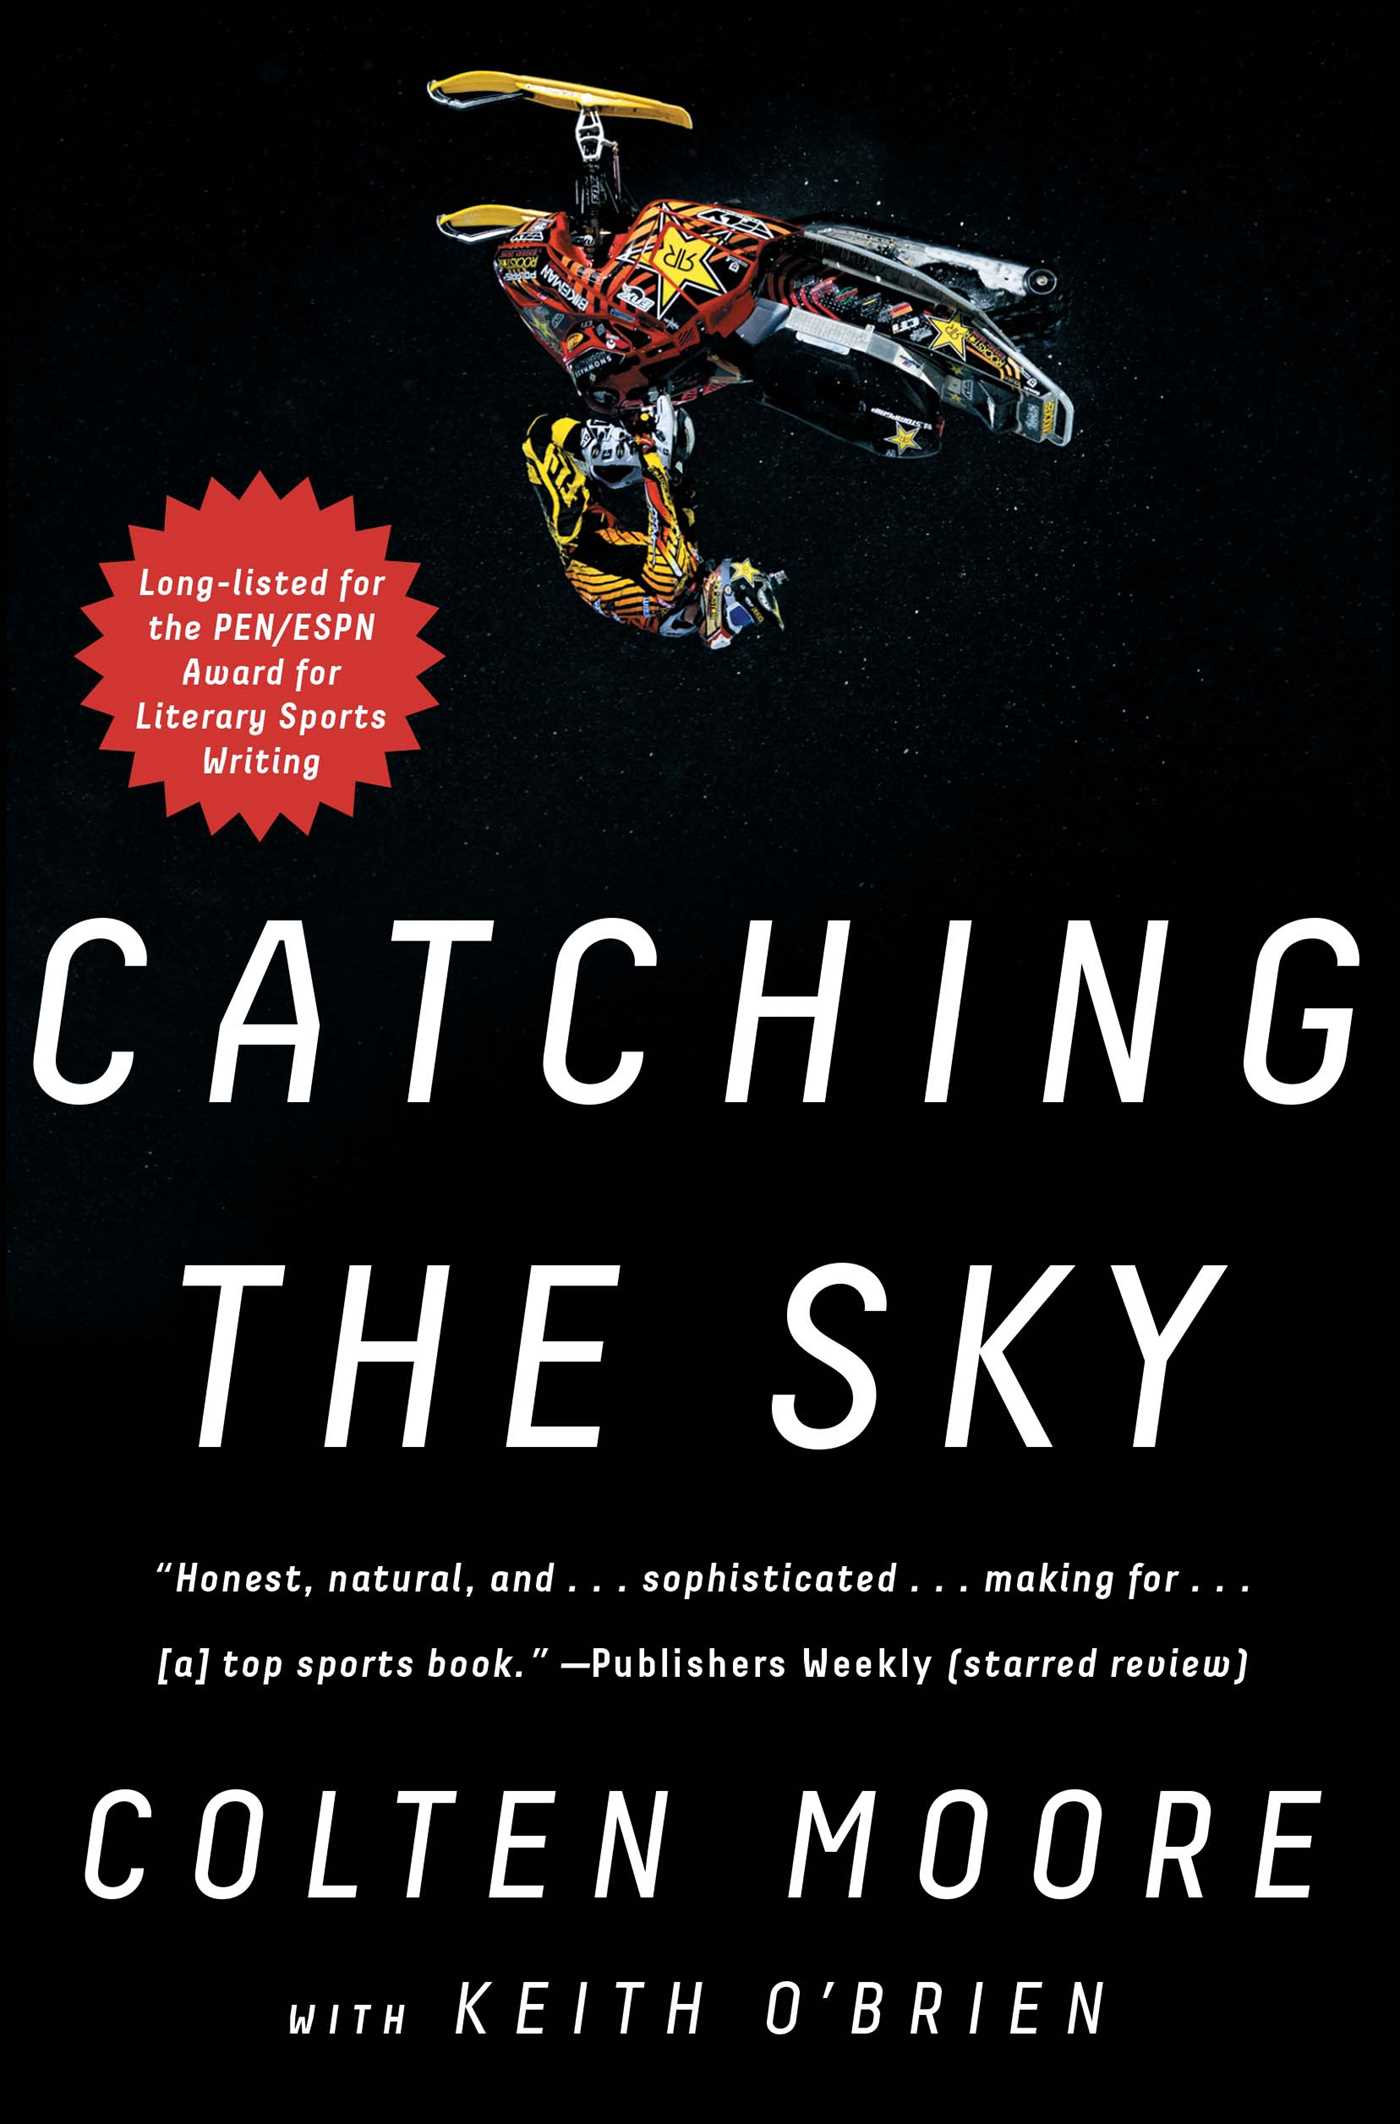 Catching the Sky | Book by Colten Moore, Keith O'Brien | Official ...